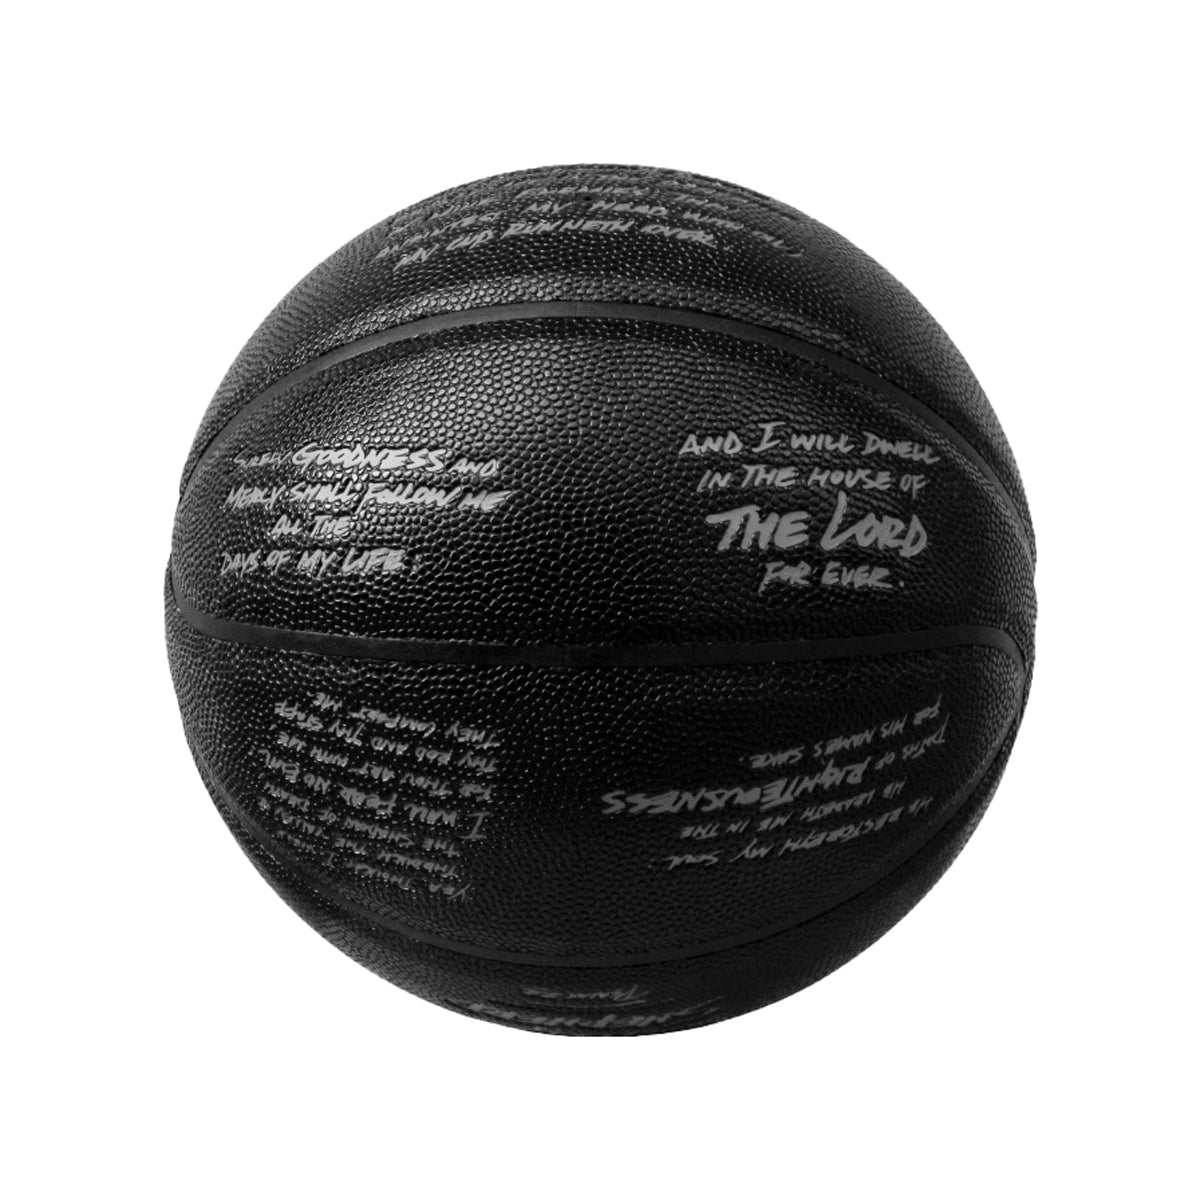 Psalm 23 Basketball - Limited Edition